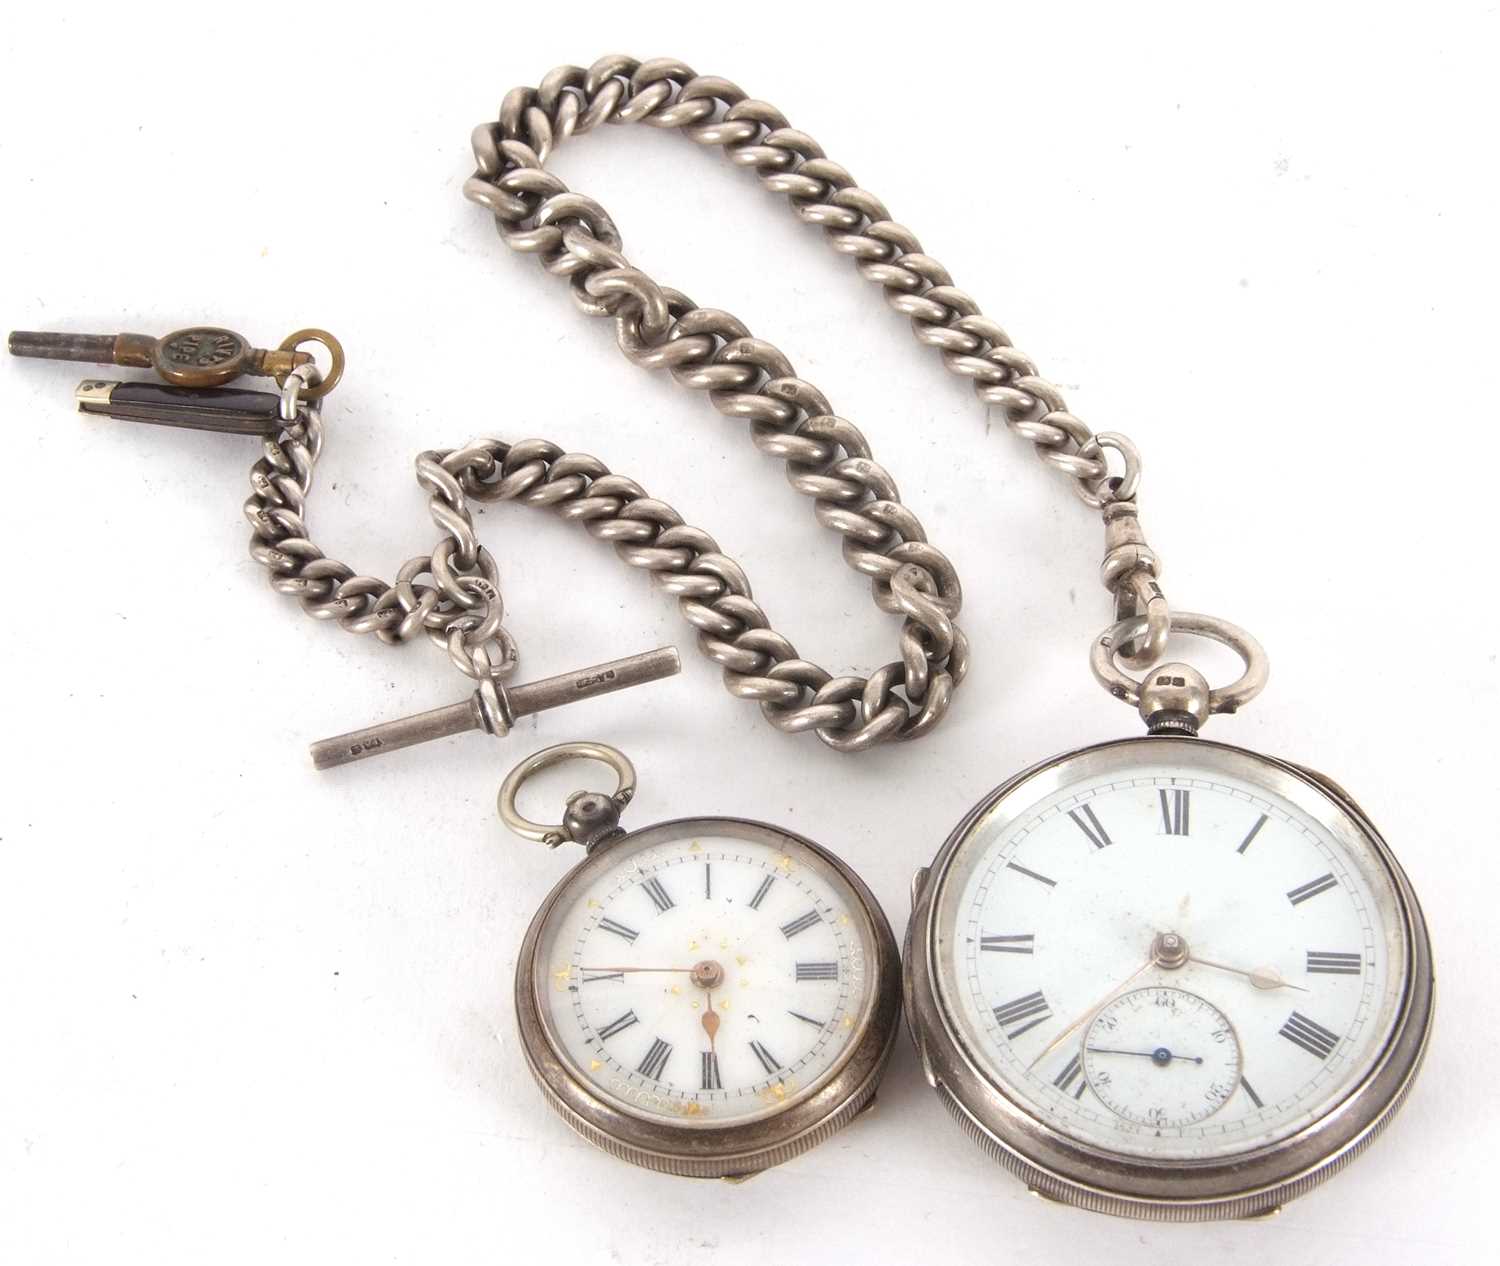 Two pocket watches, one silver gents open face pocket watch with silver albert chain, both the